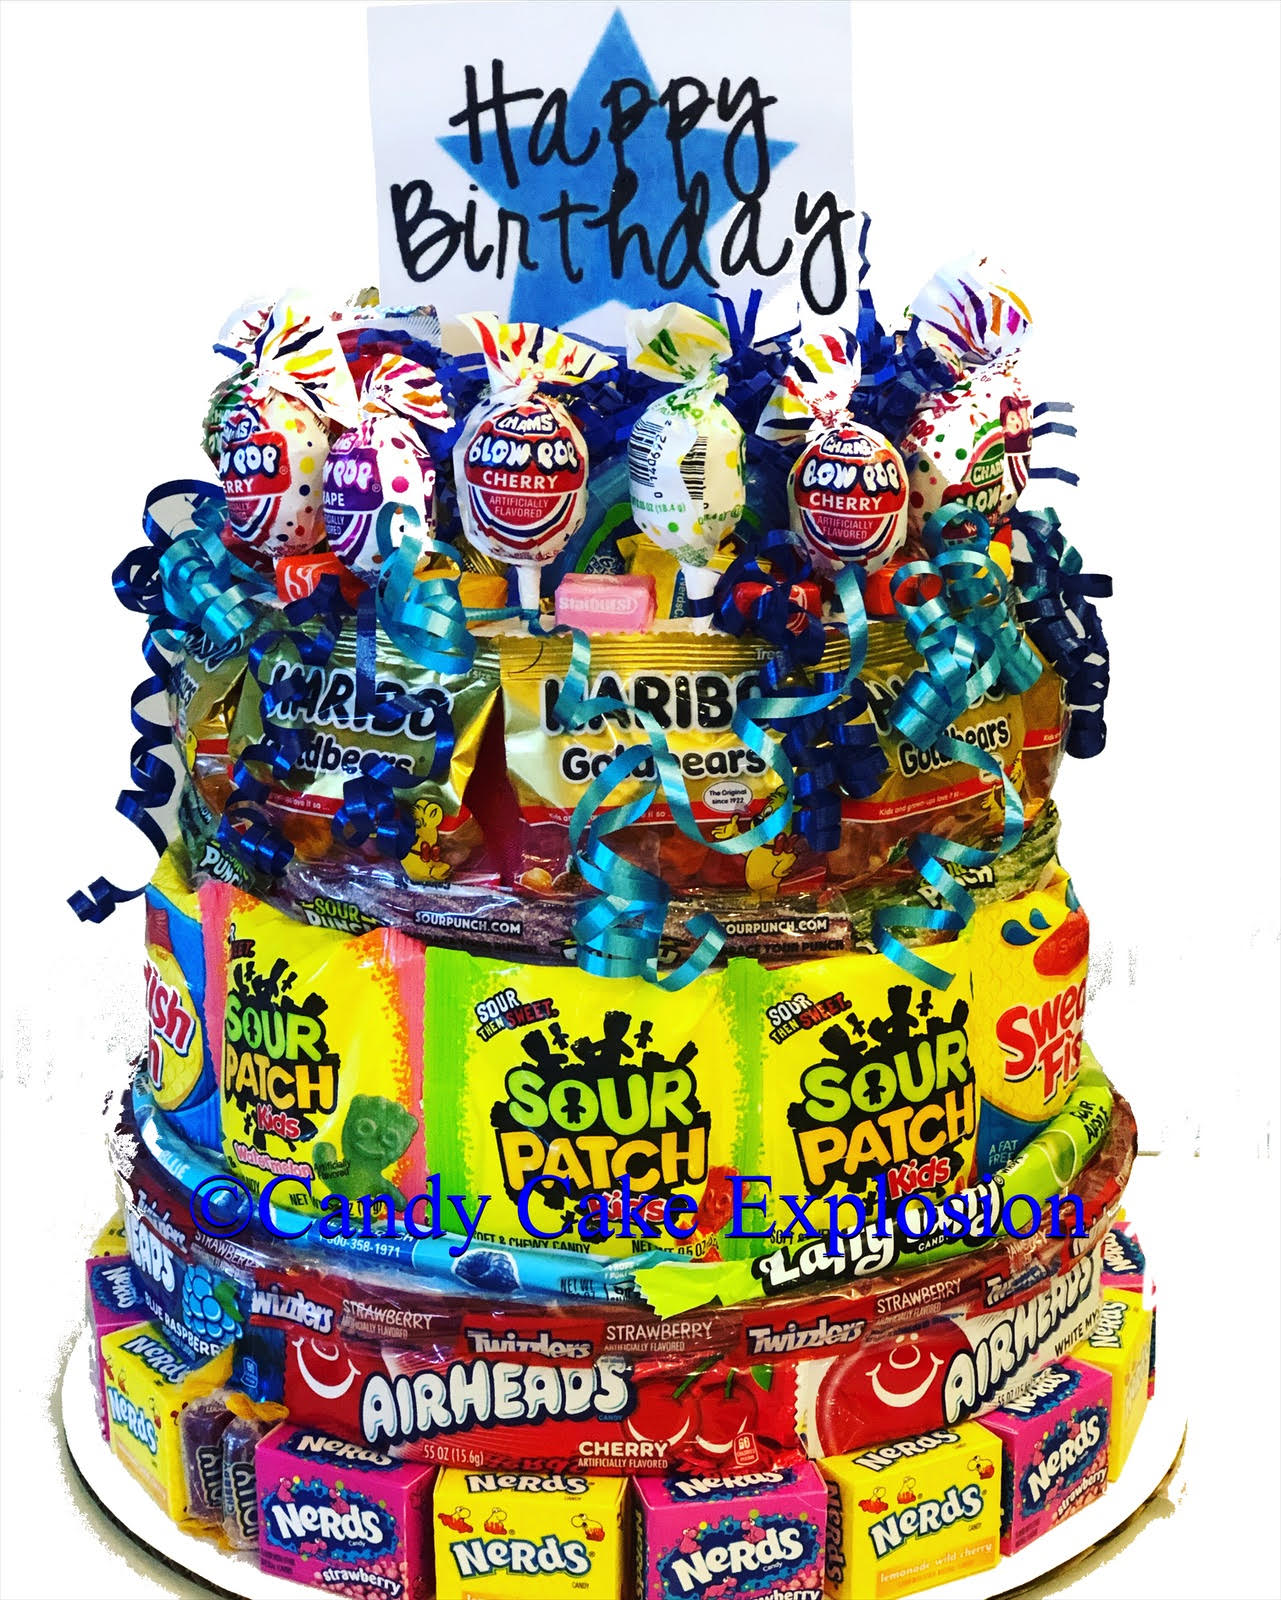 He called it Tim Burton's party cake. Swipe for results : r/DiWHY